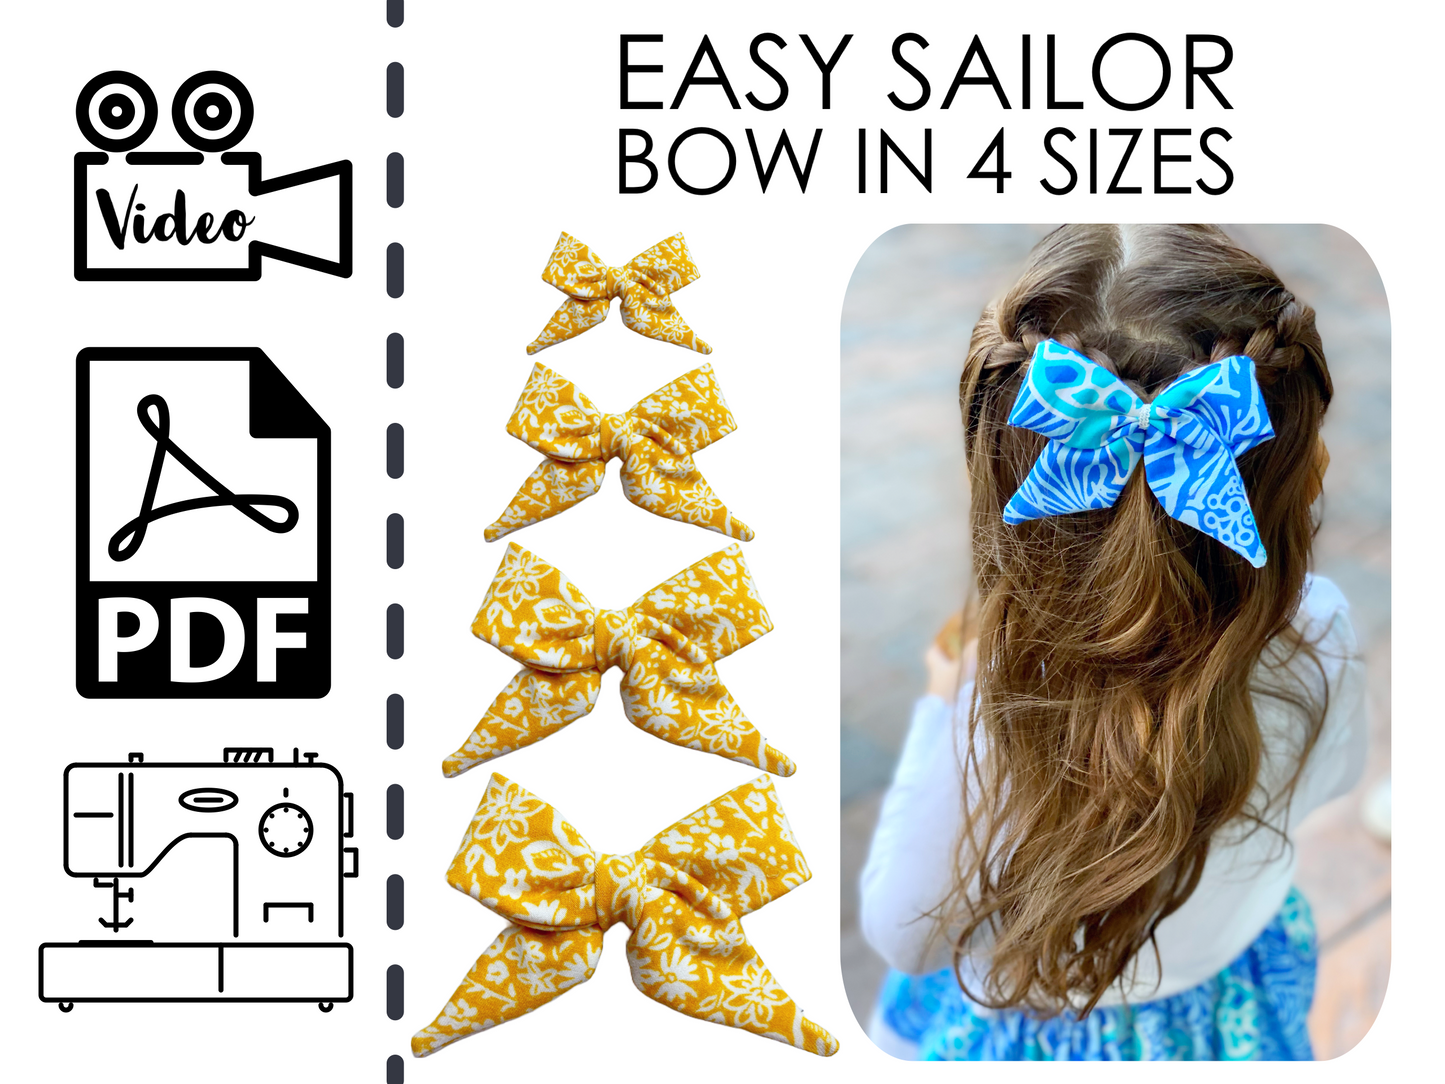 fabric sailor hair bow sewing pattern